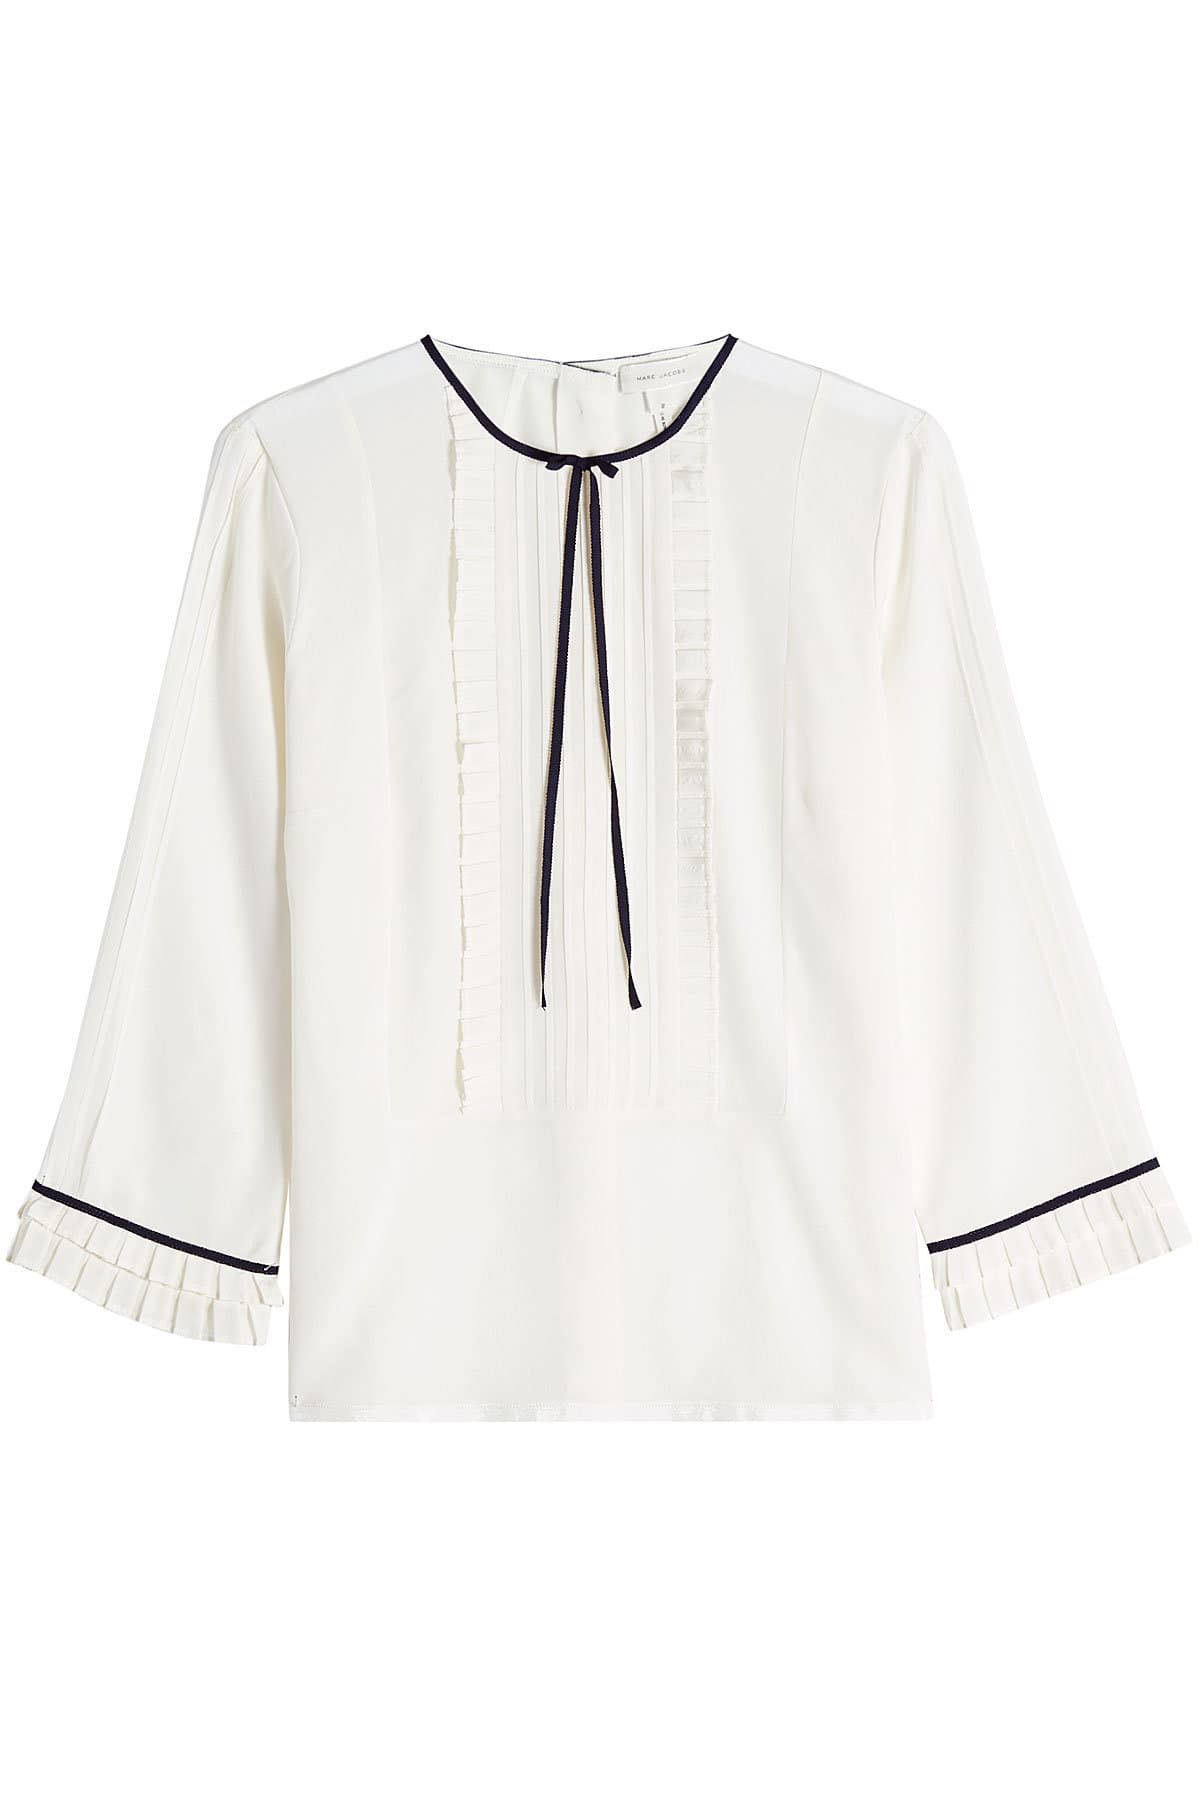 Pintuck Silk Blouse by Marc Jacobs